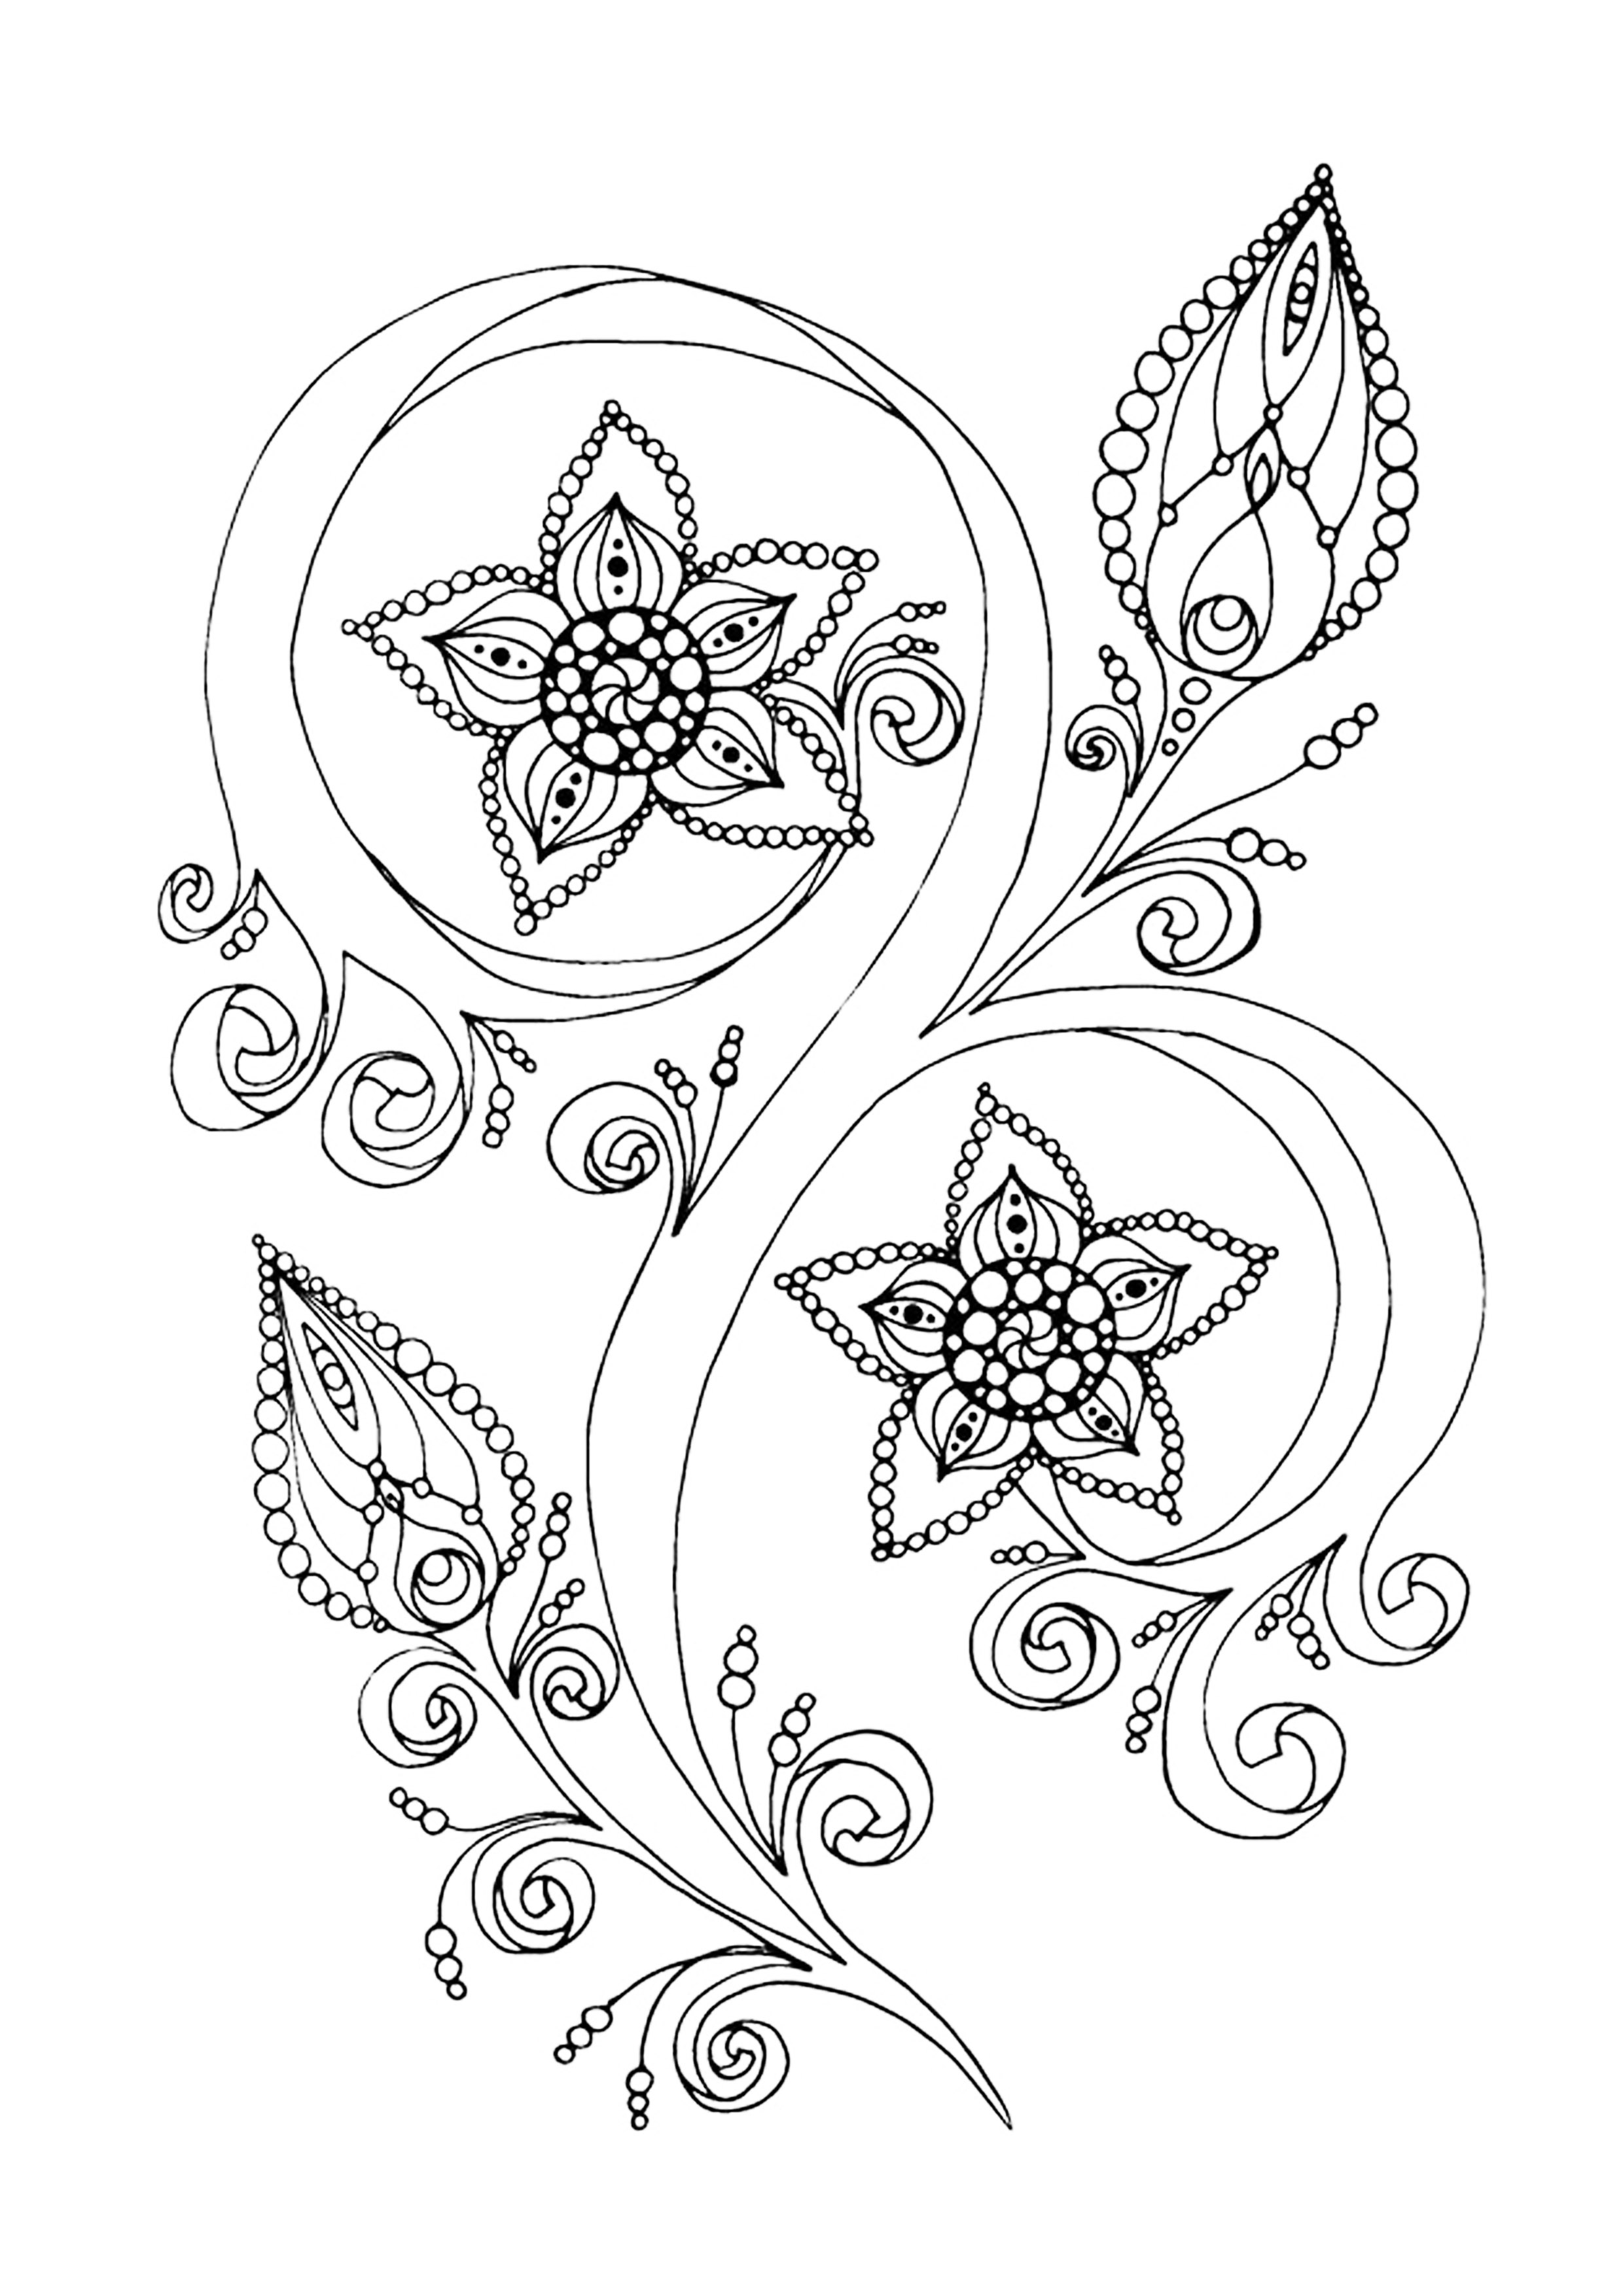 Download Zen antistress abstract pattern inspired - Anti stress Adult Coloring Pages - Page 5